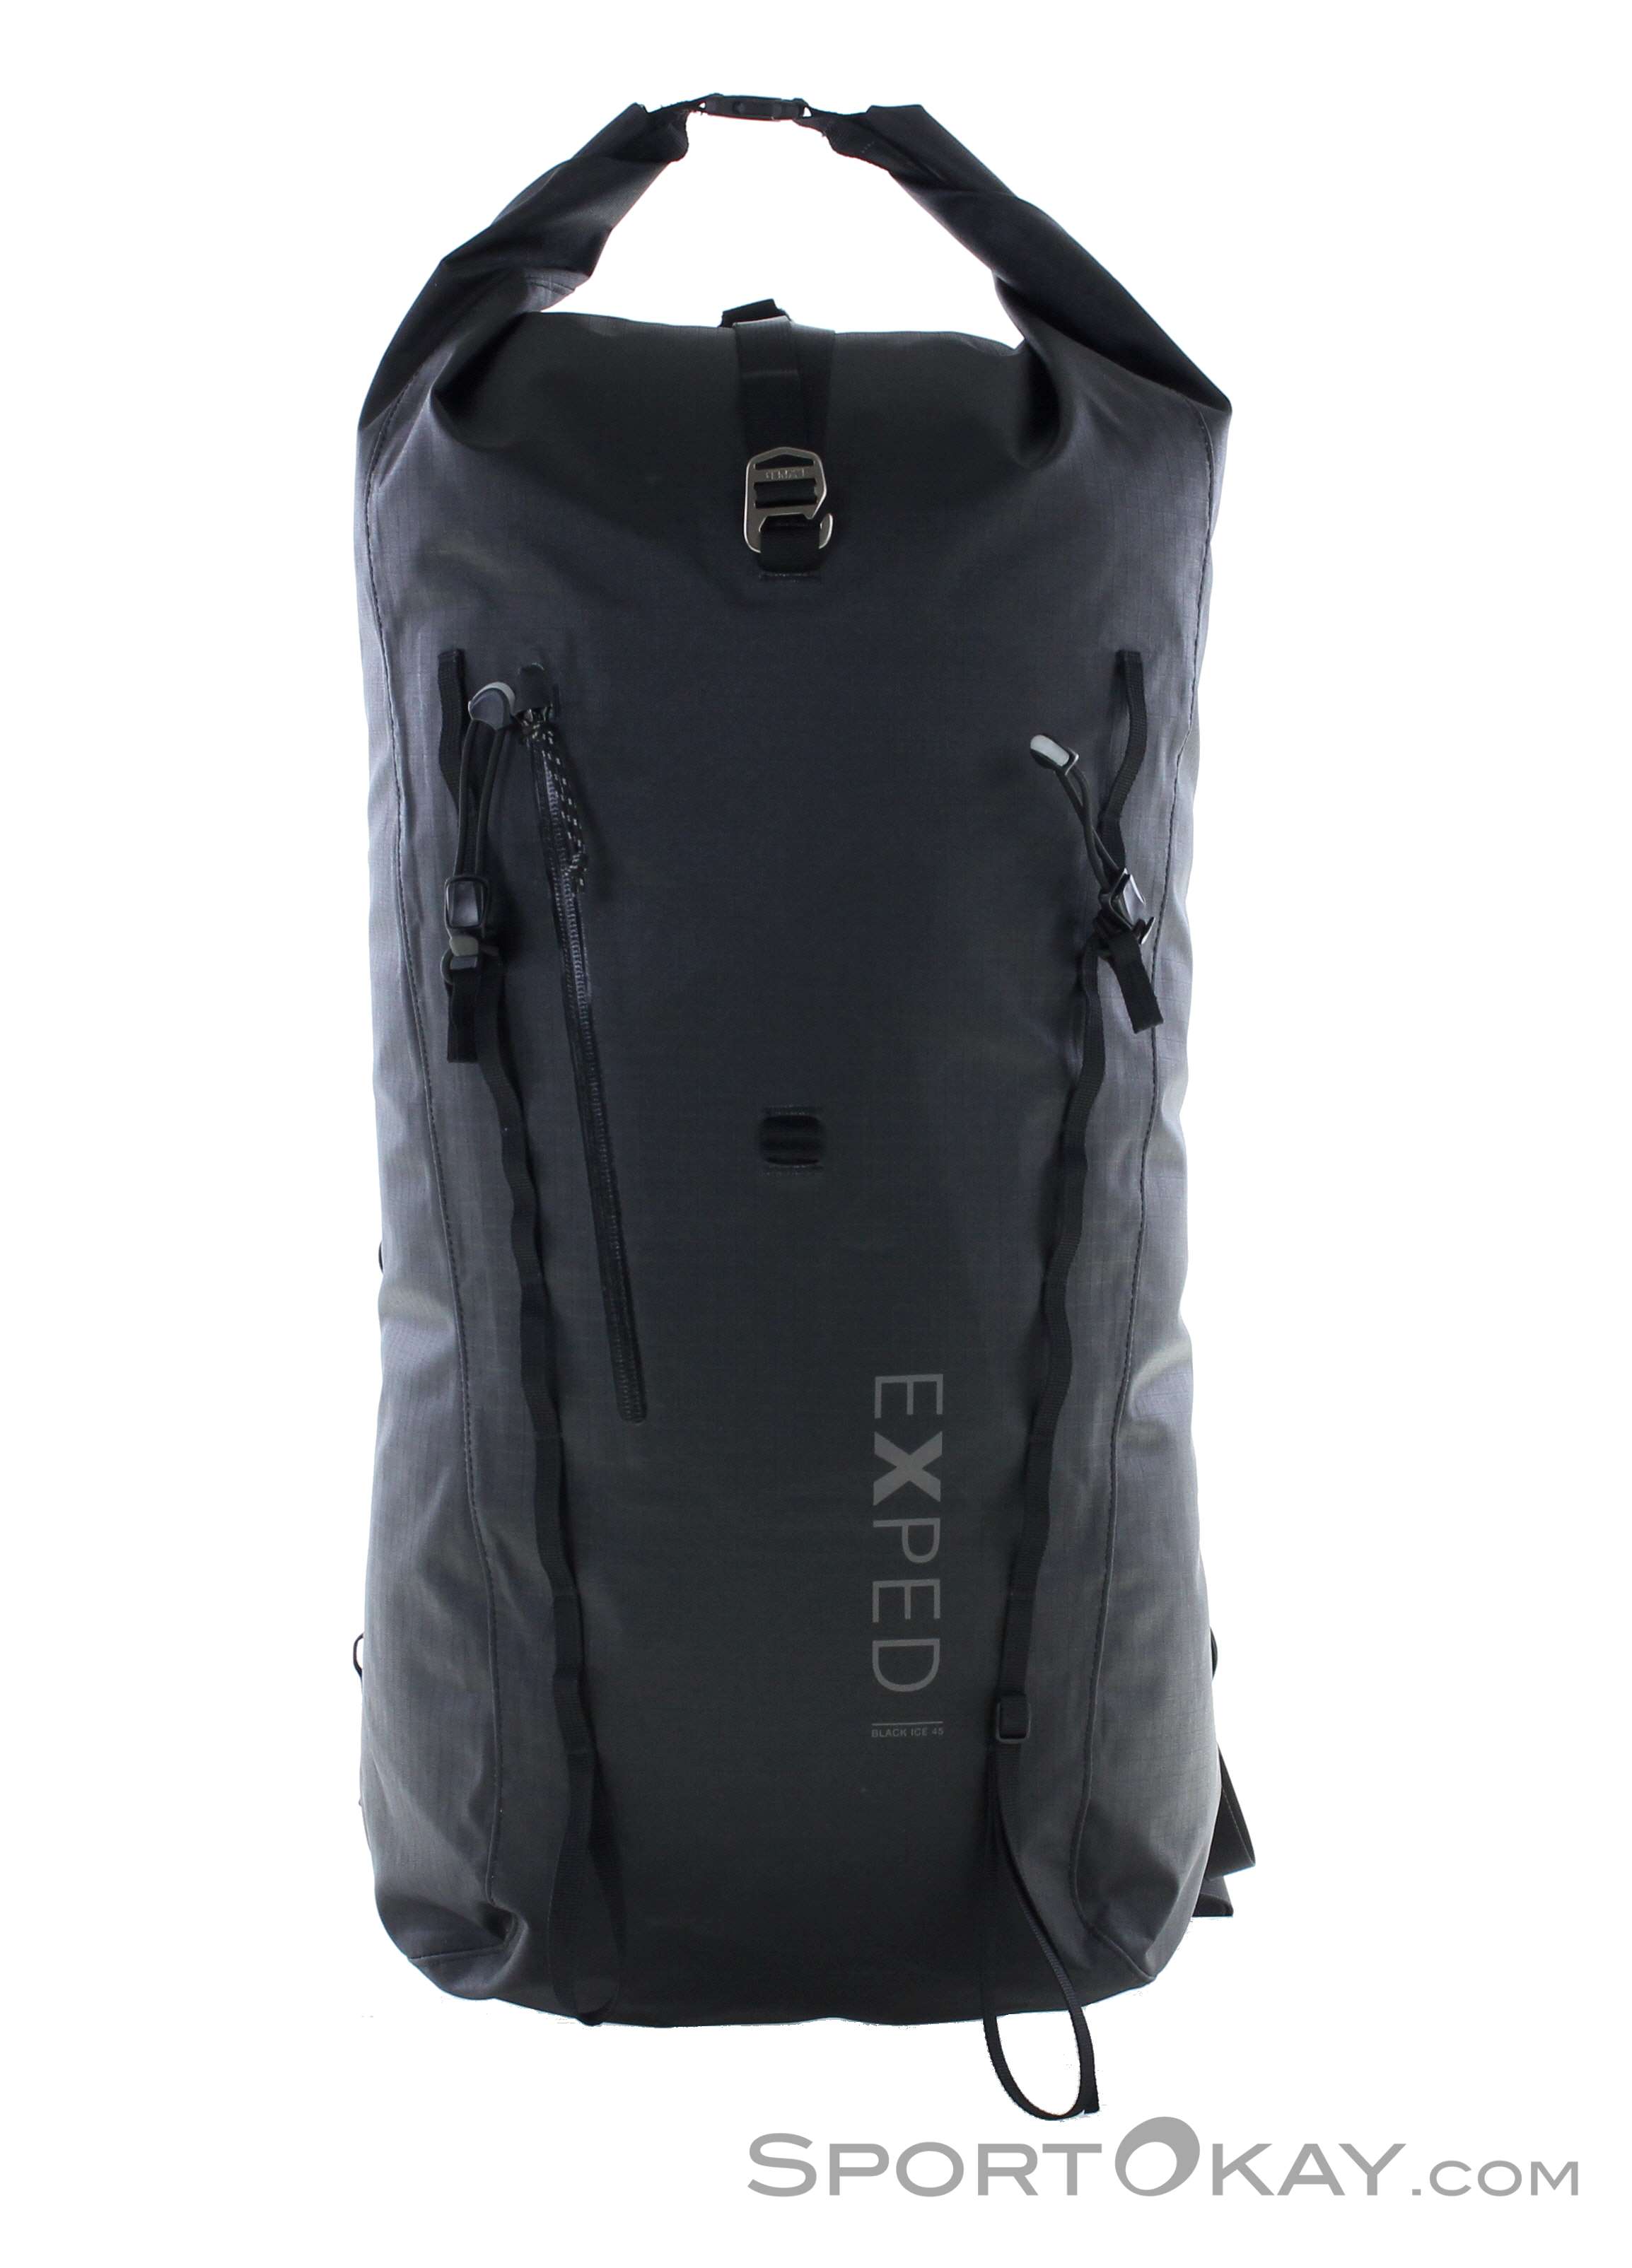 Exped Black Ice 45l Backpack - Backpacks - Backpacks & Headlamps - Outdoor  - All